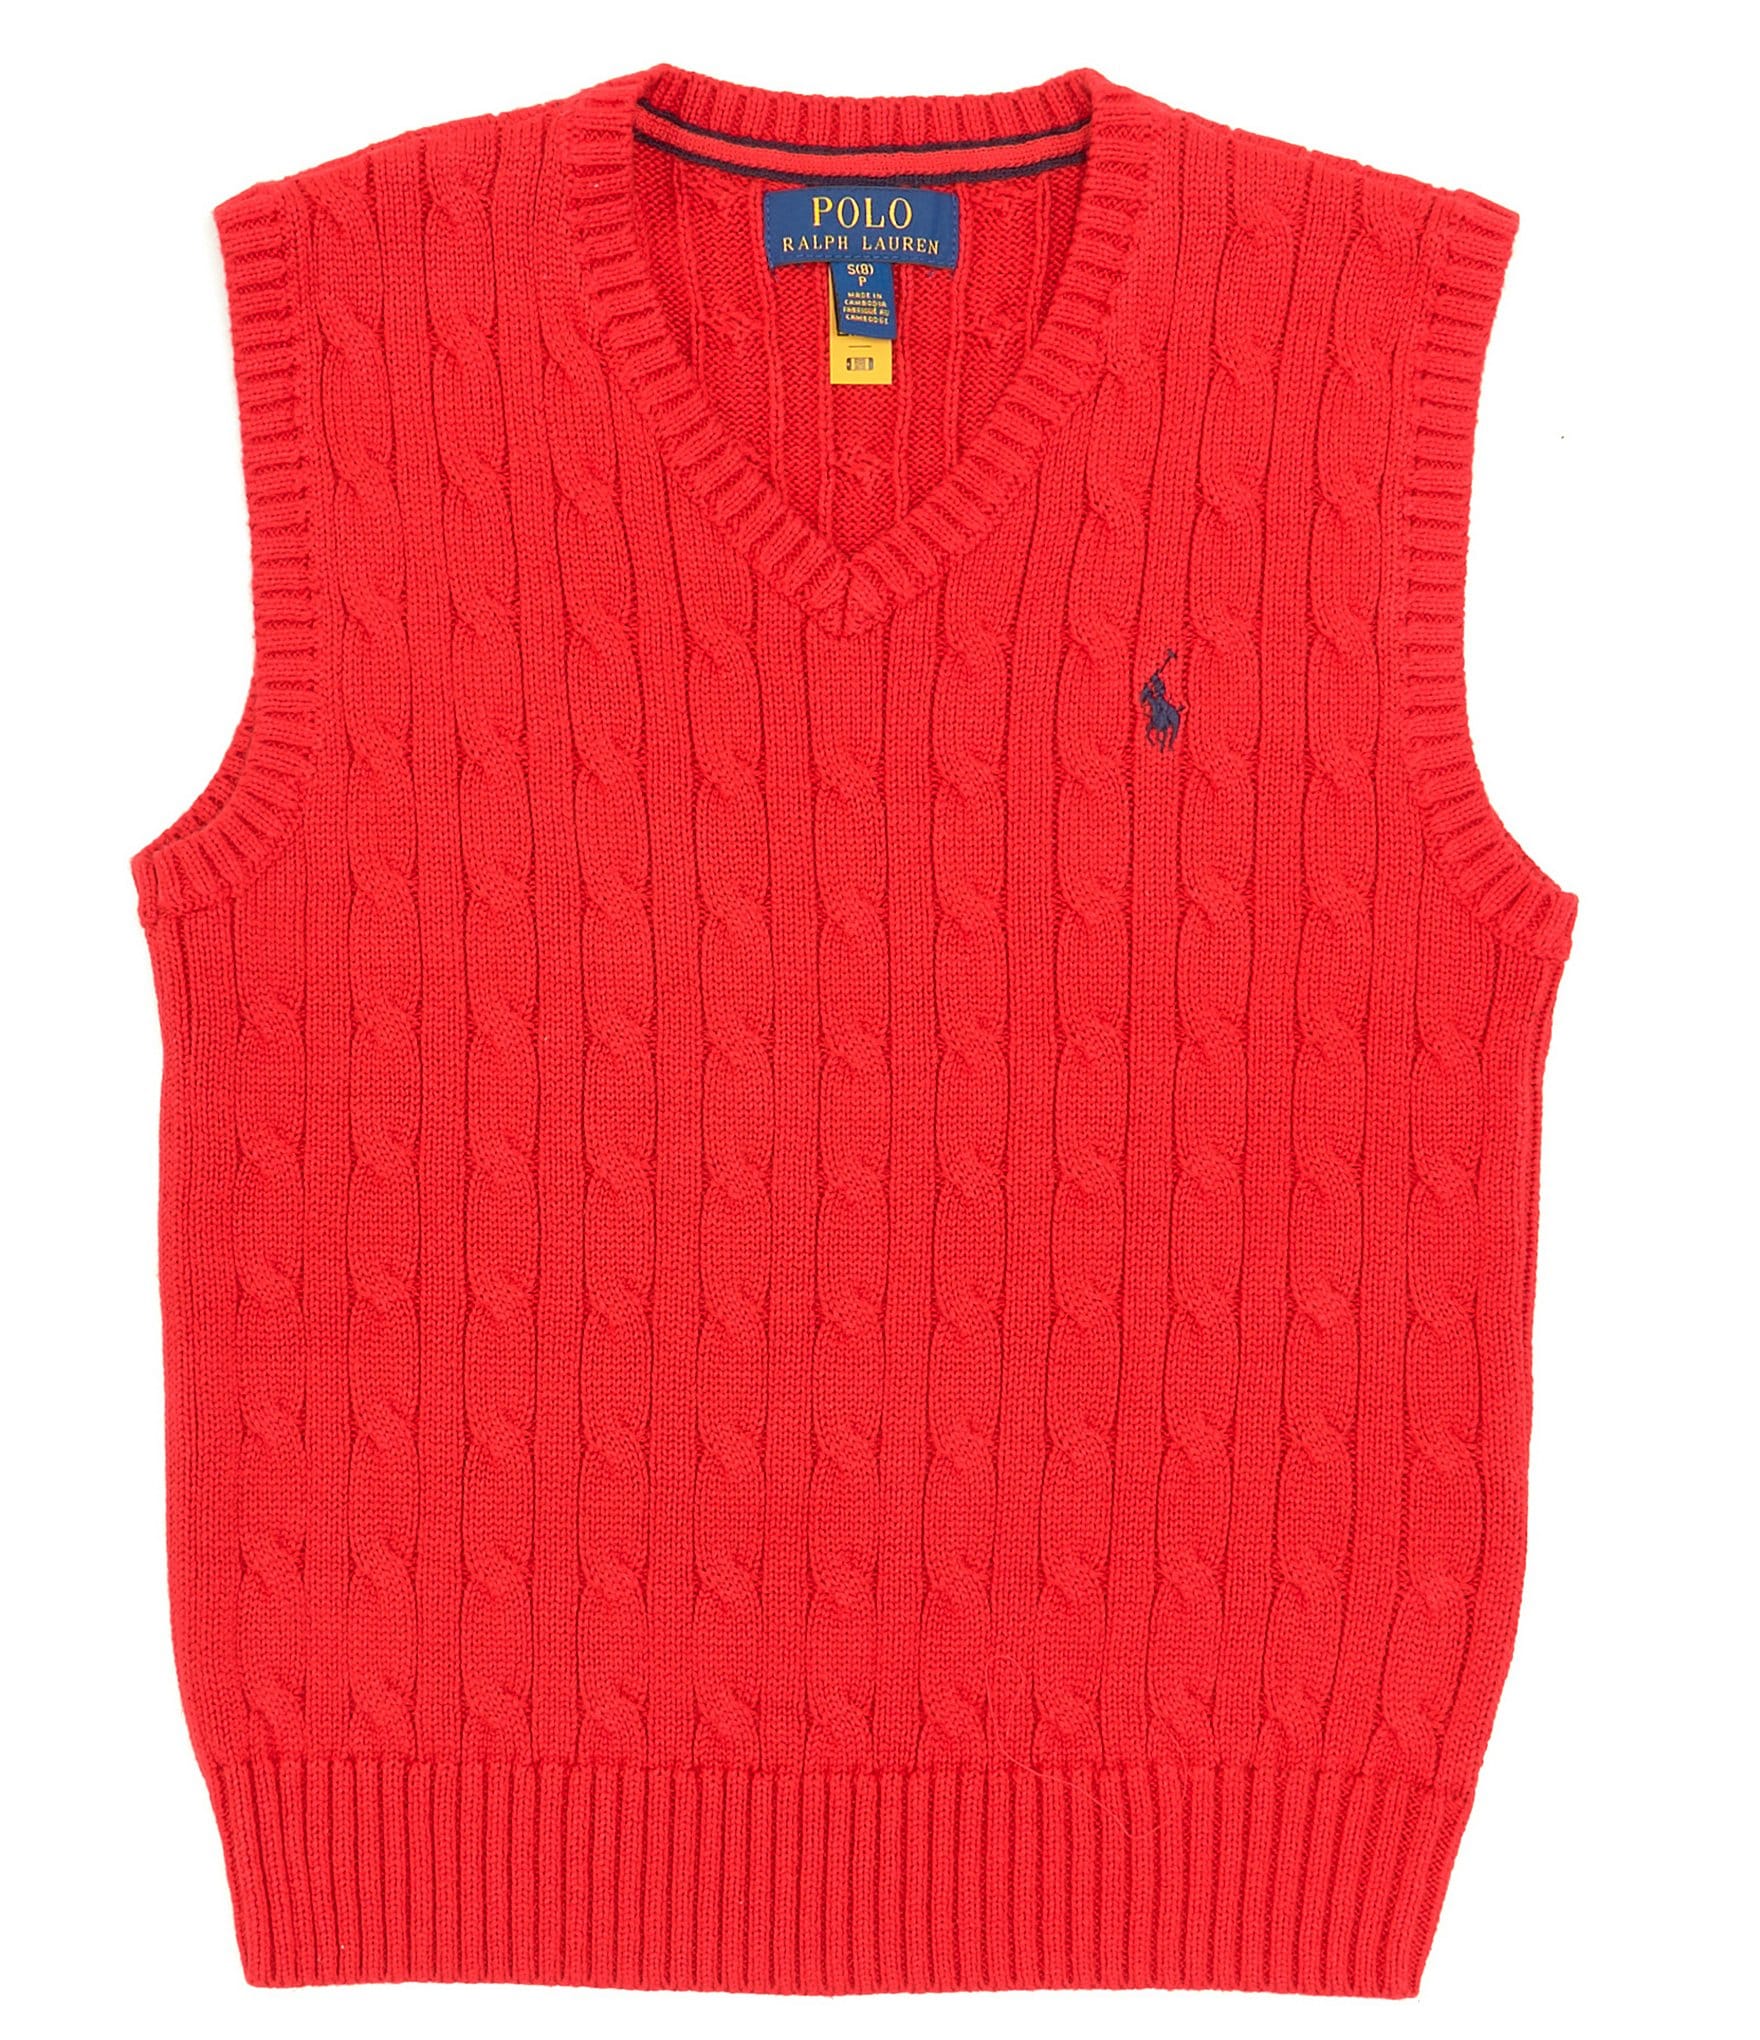 Polo Ralph Lauren Big Boys 8-20 Sleeveless Cable Knit Sweater Vest